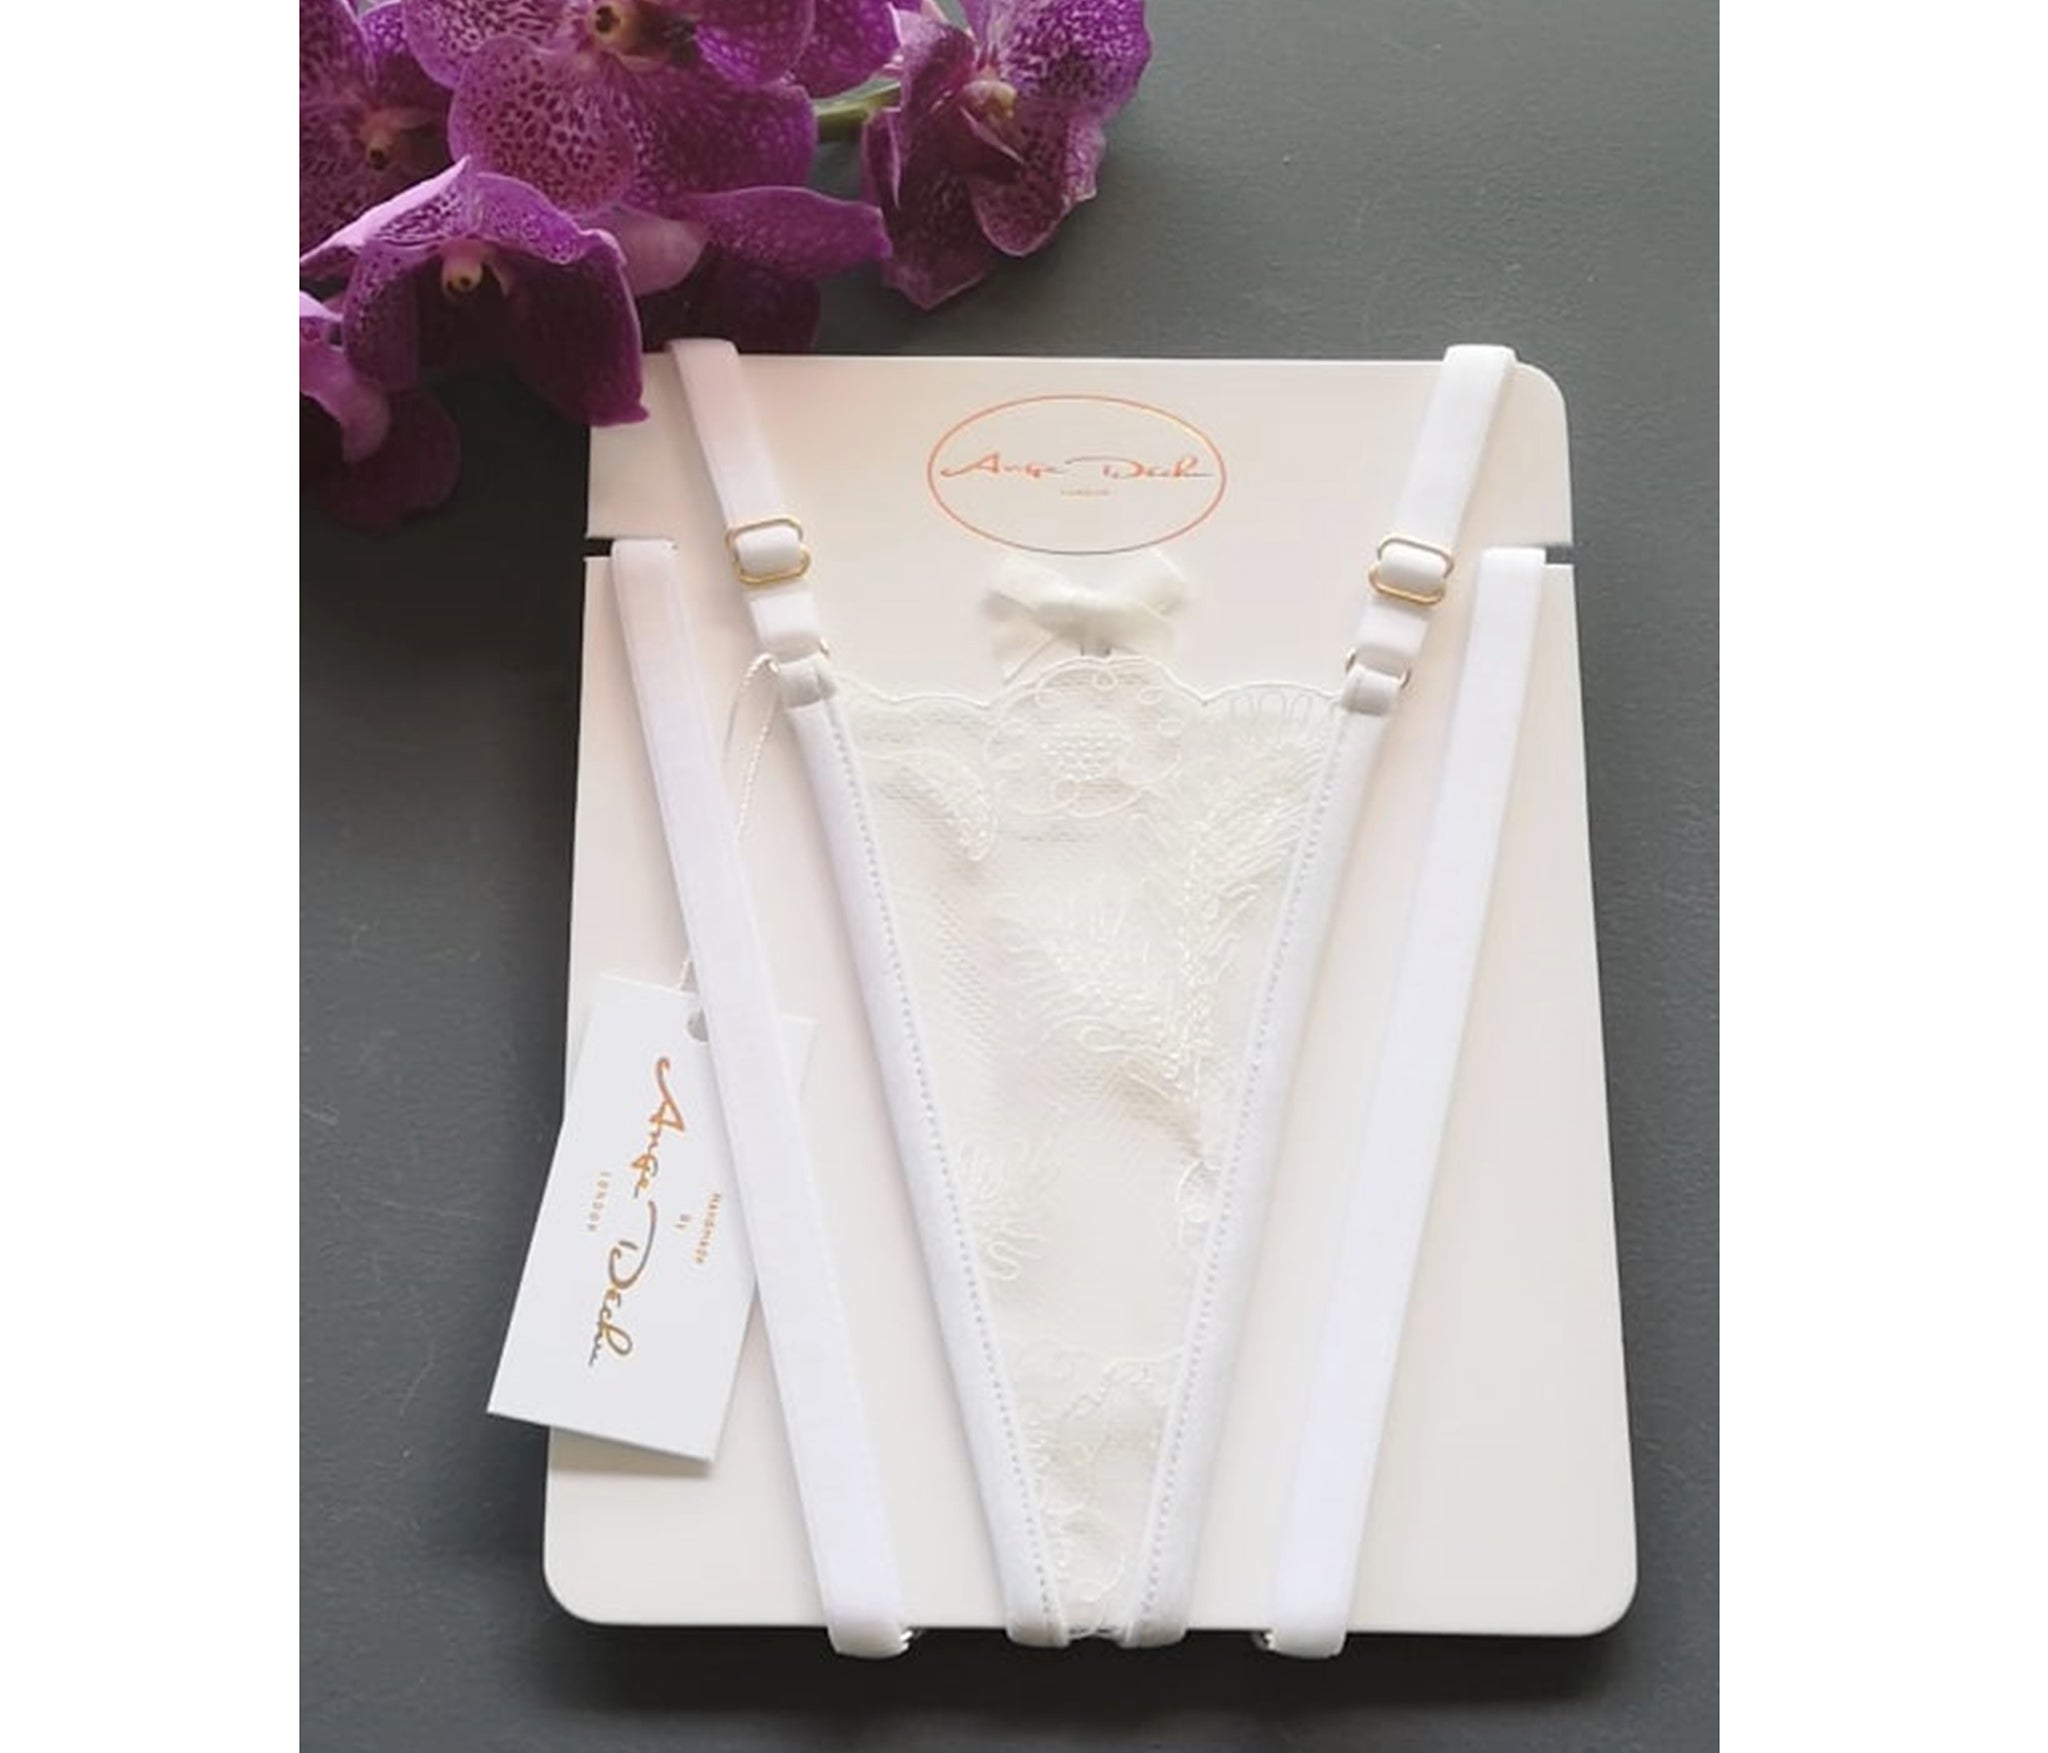 Sexy sheer see through lingerie panties gift for her in white lace high cut thong - Ange Déchu